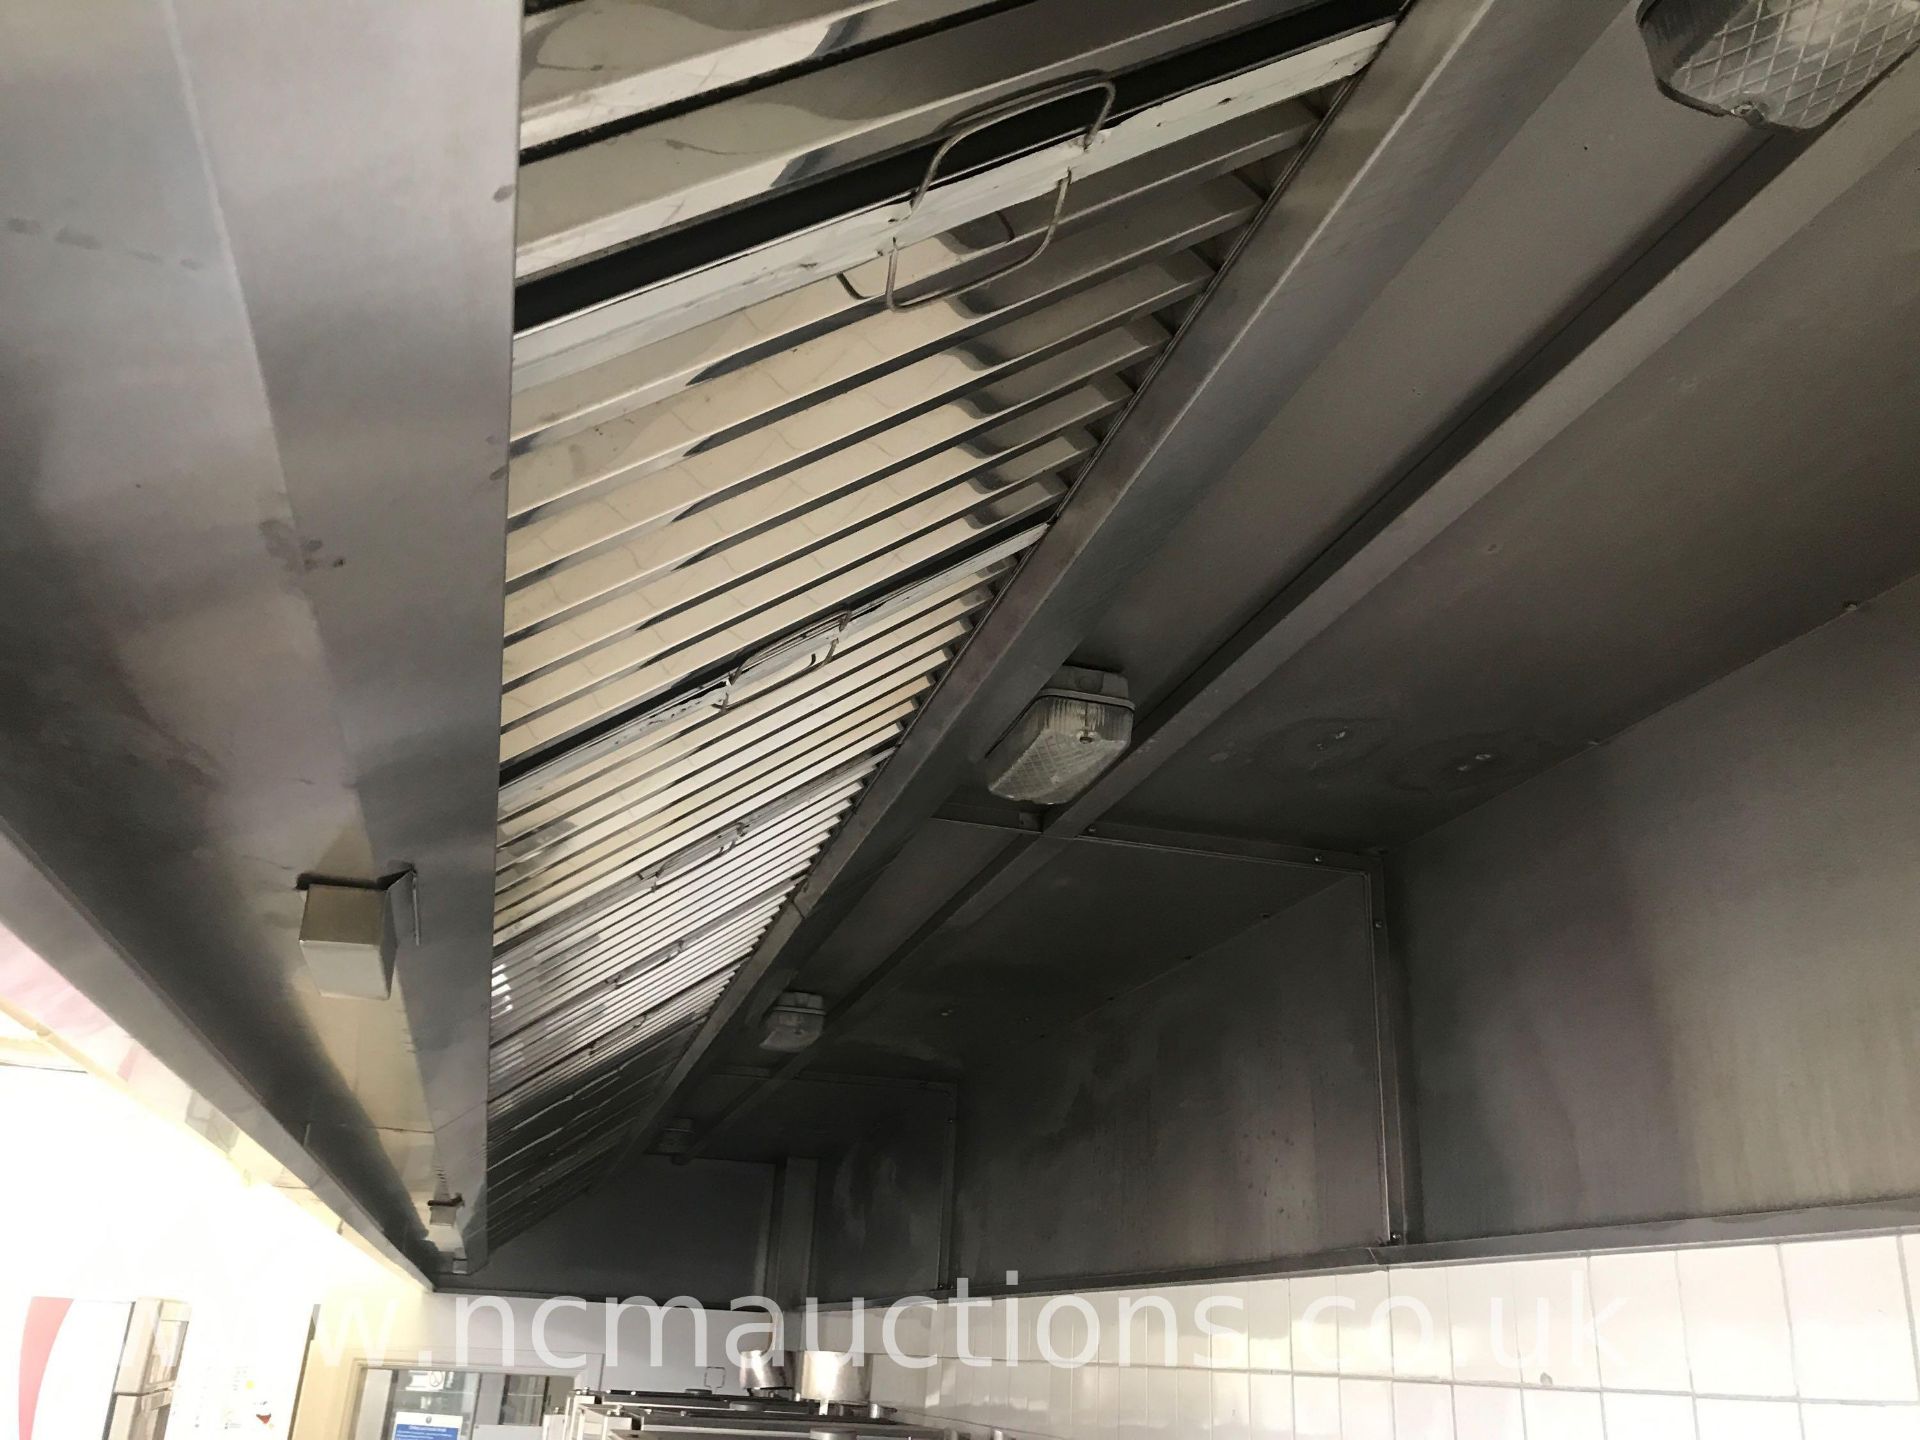 Stainless Steel Ventilation System - Image 4 of 9